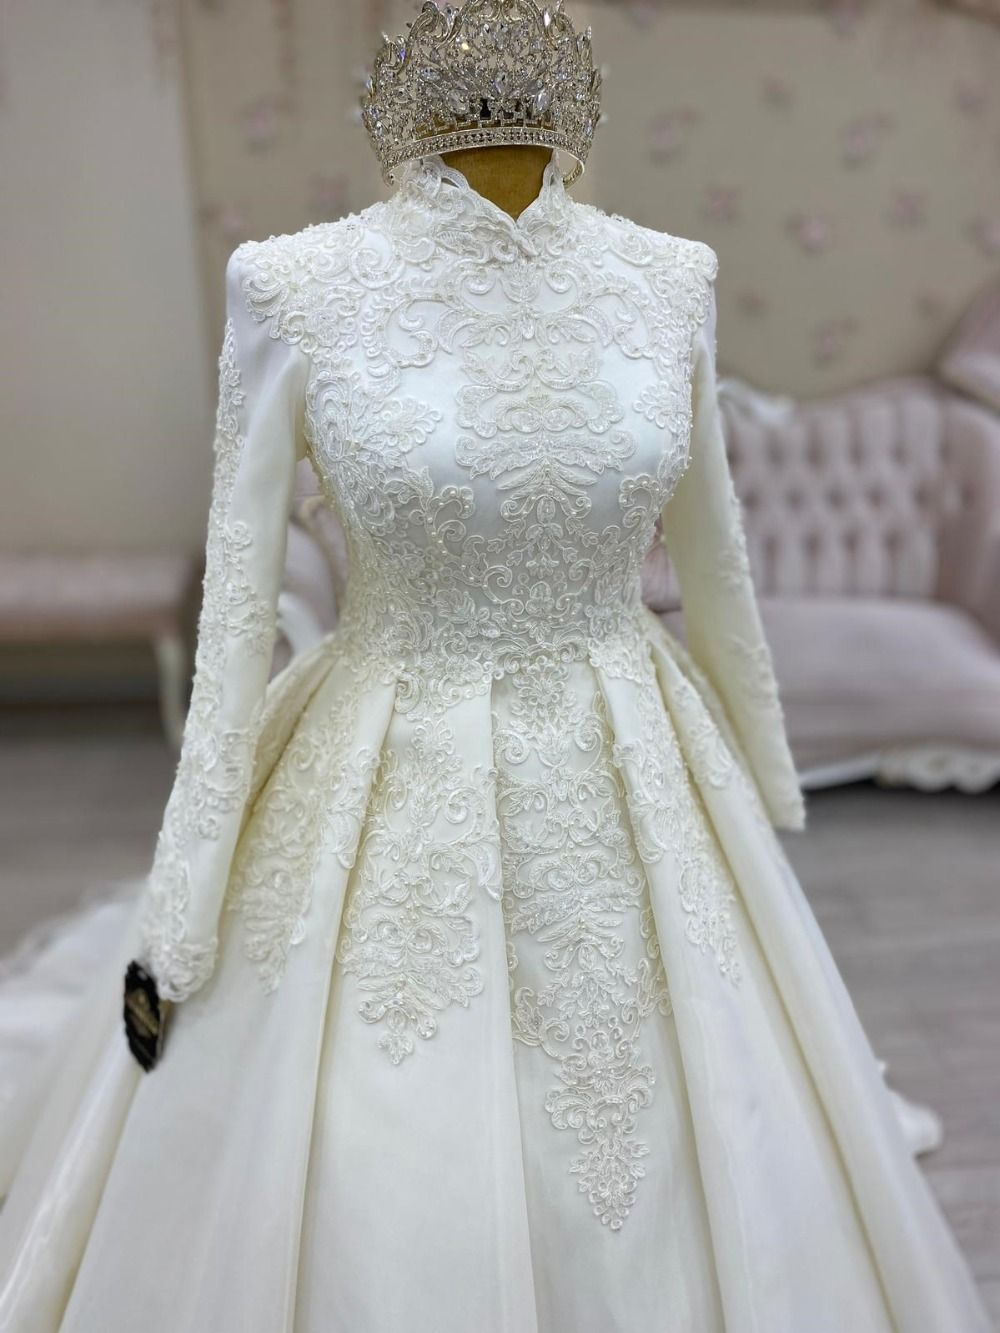 Vintage Islamic Muslim A Line Wedding Dresses Bridal Gowns Pattern Lace Appliques High Collar Long Sleeves Beading Arabic Dubai Formal Bride Dress 2022 From Sexybride, $142.07 DHgate picture